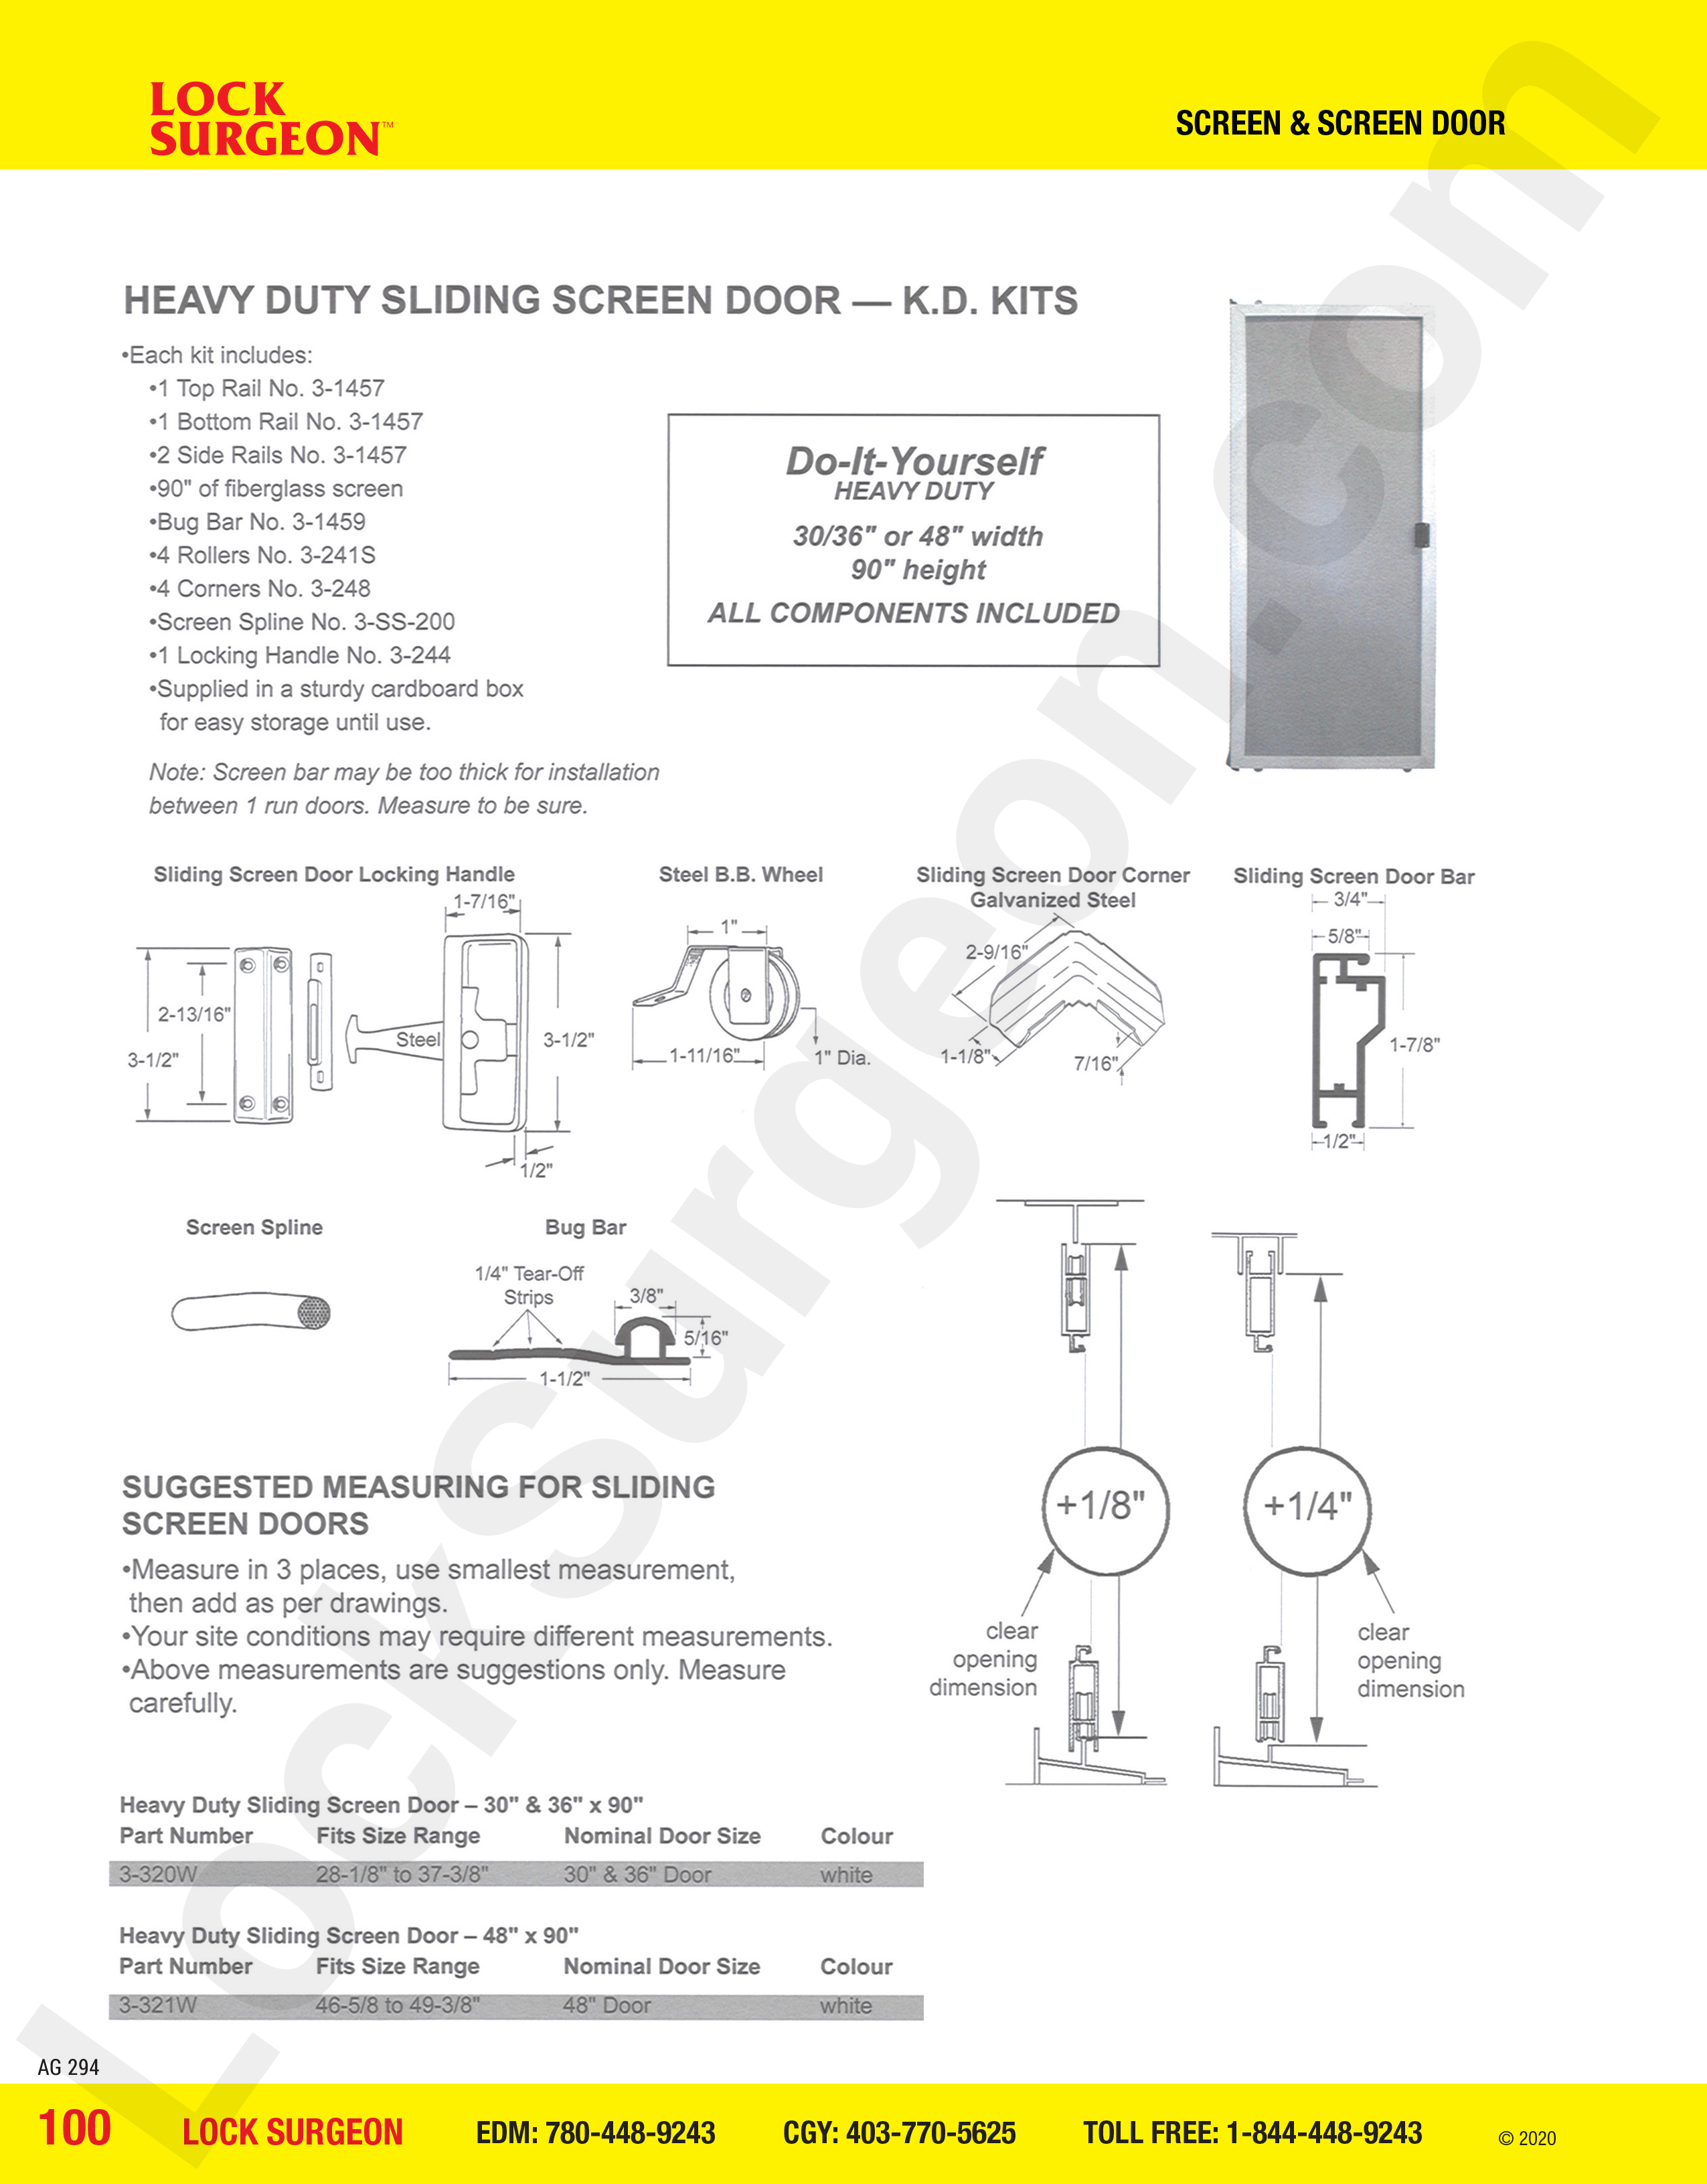 Heavy duty sliding screen dooor kits with all components included sold at Lock Surgeon Edmonton South.